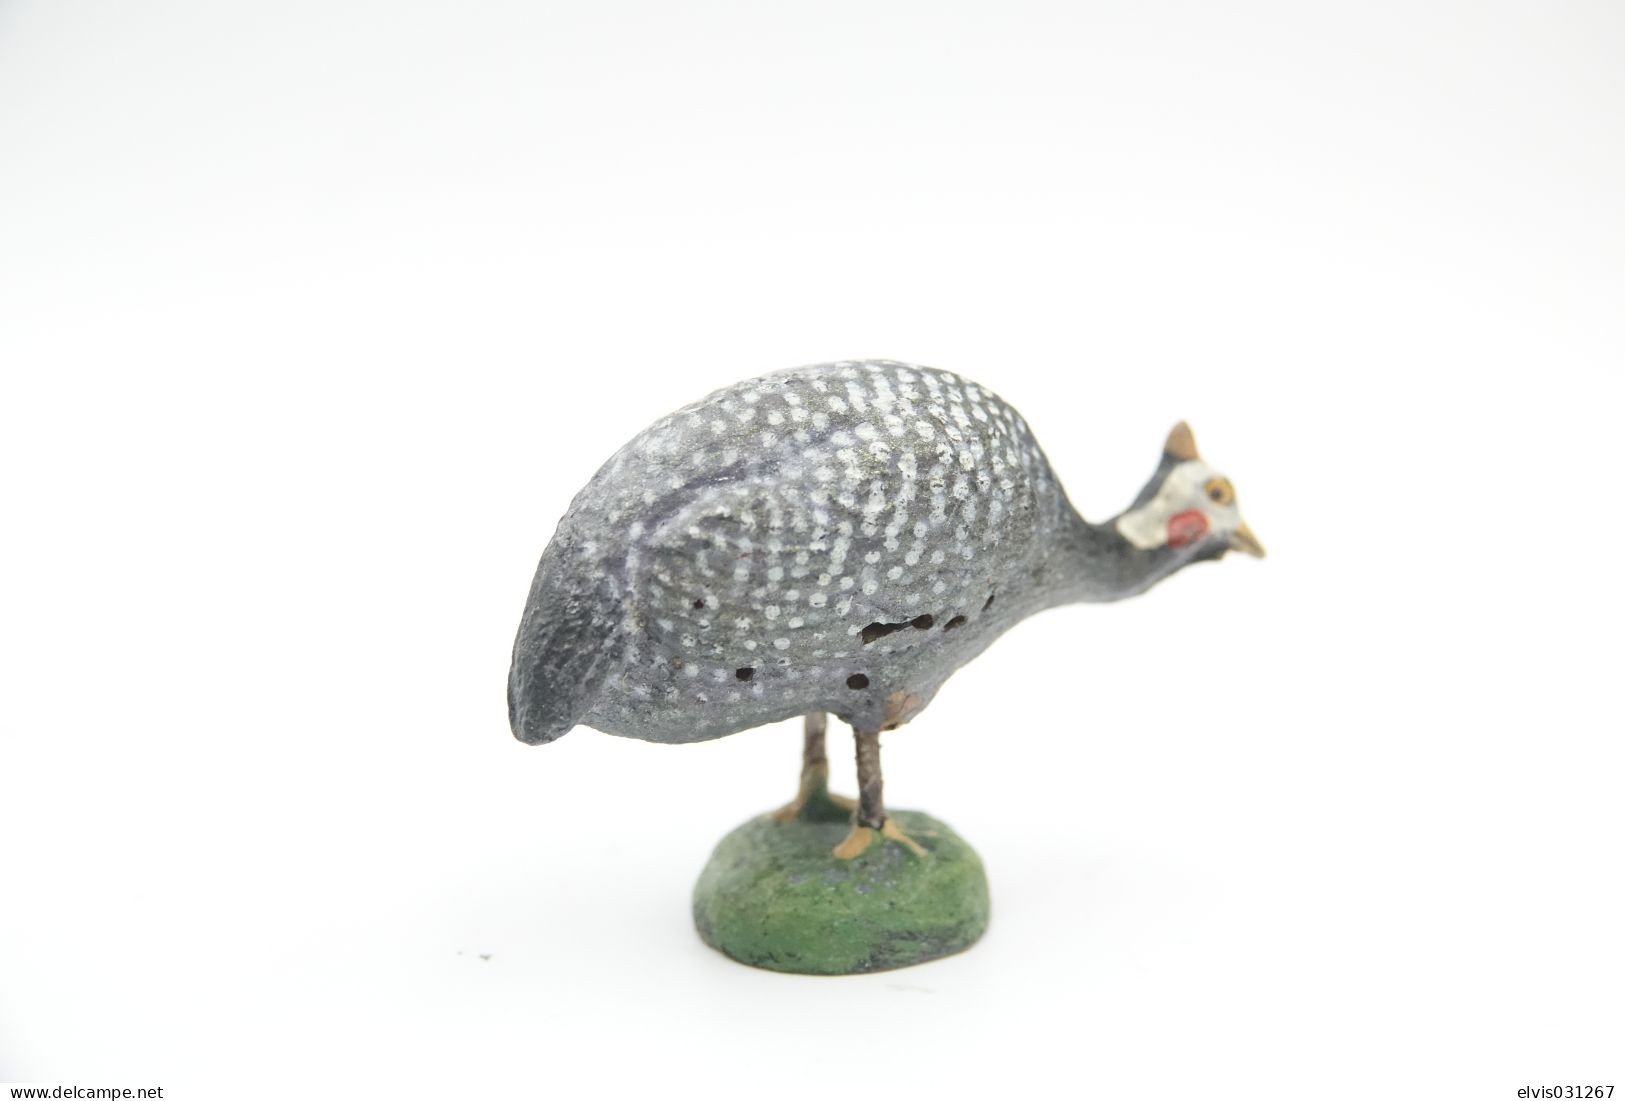 Elastolin, Lineol Hauser, Animals Guineafowl N°4086, Vintage Toy 1930's - Small Figures